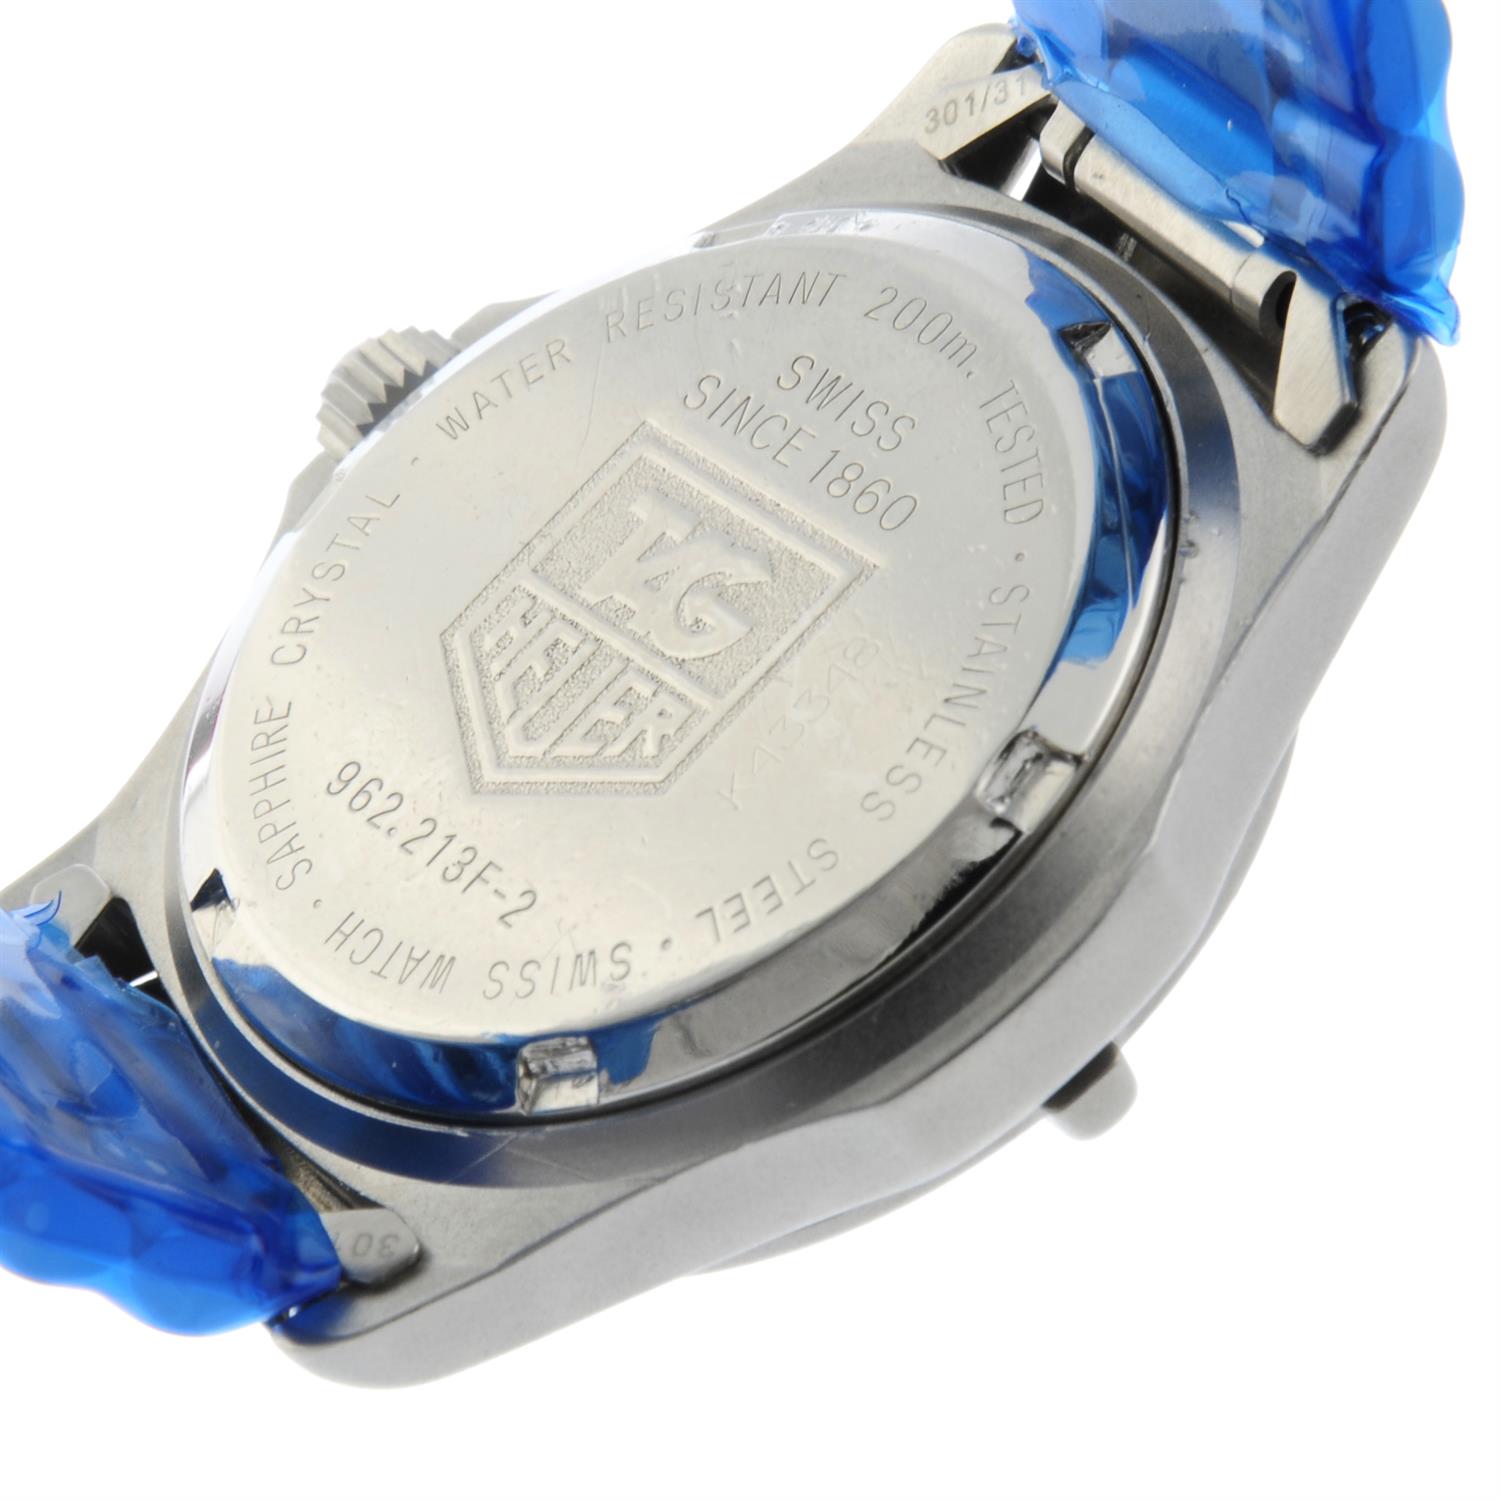 TAG HEUER - a stainless steel 2000 Series bracelet watch, 33mm. - Image 4 of 4